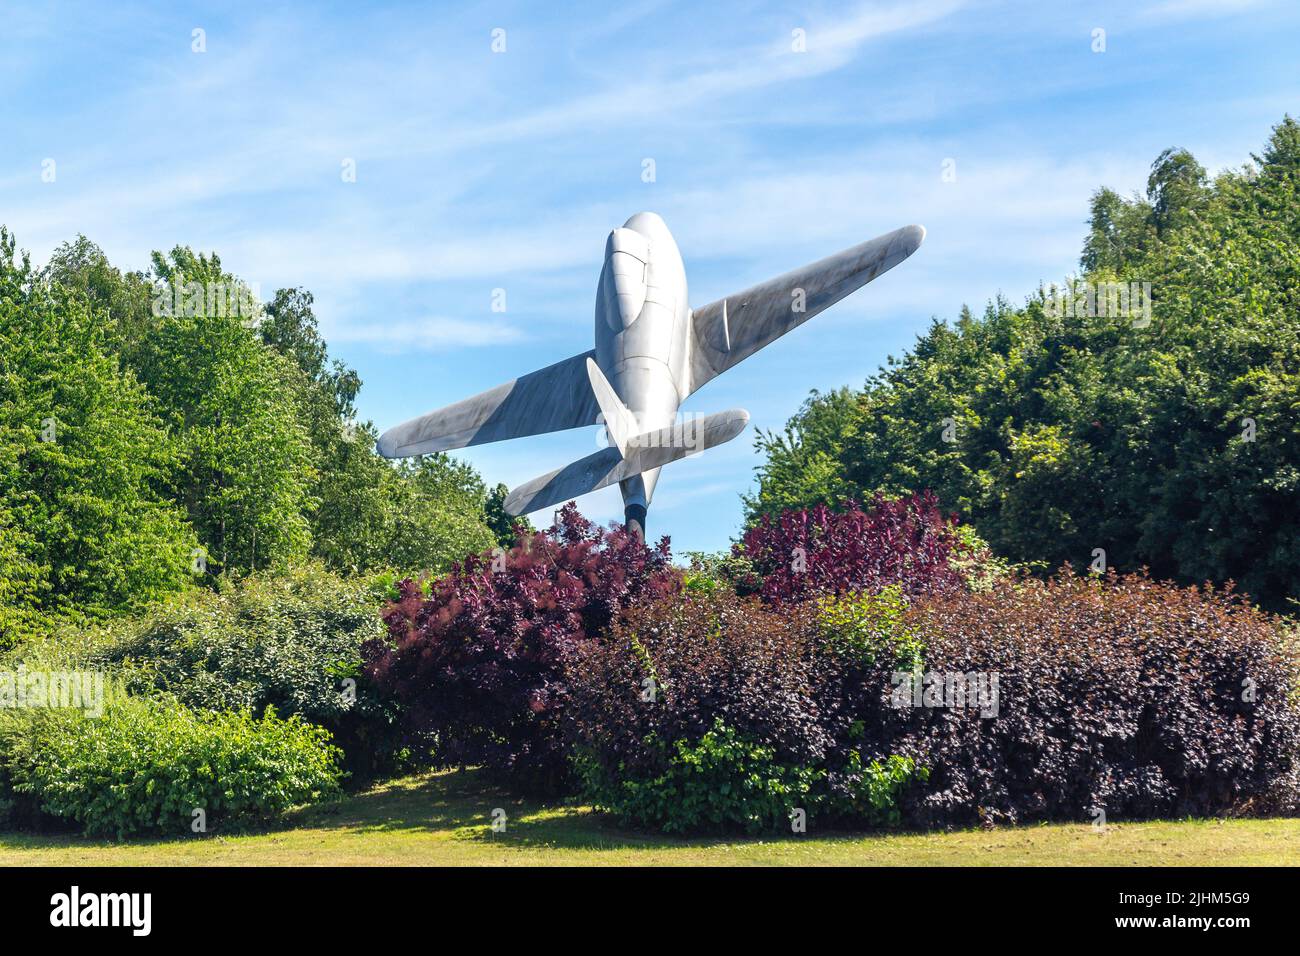 Gloster aircraft on The Whittle Roundabout, Lutterworth, Leicestershire, England, United Kingdom Stock Photo